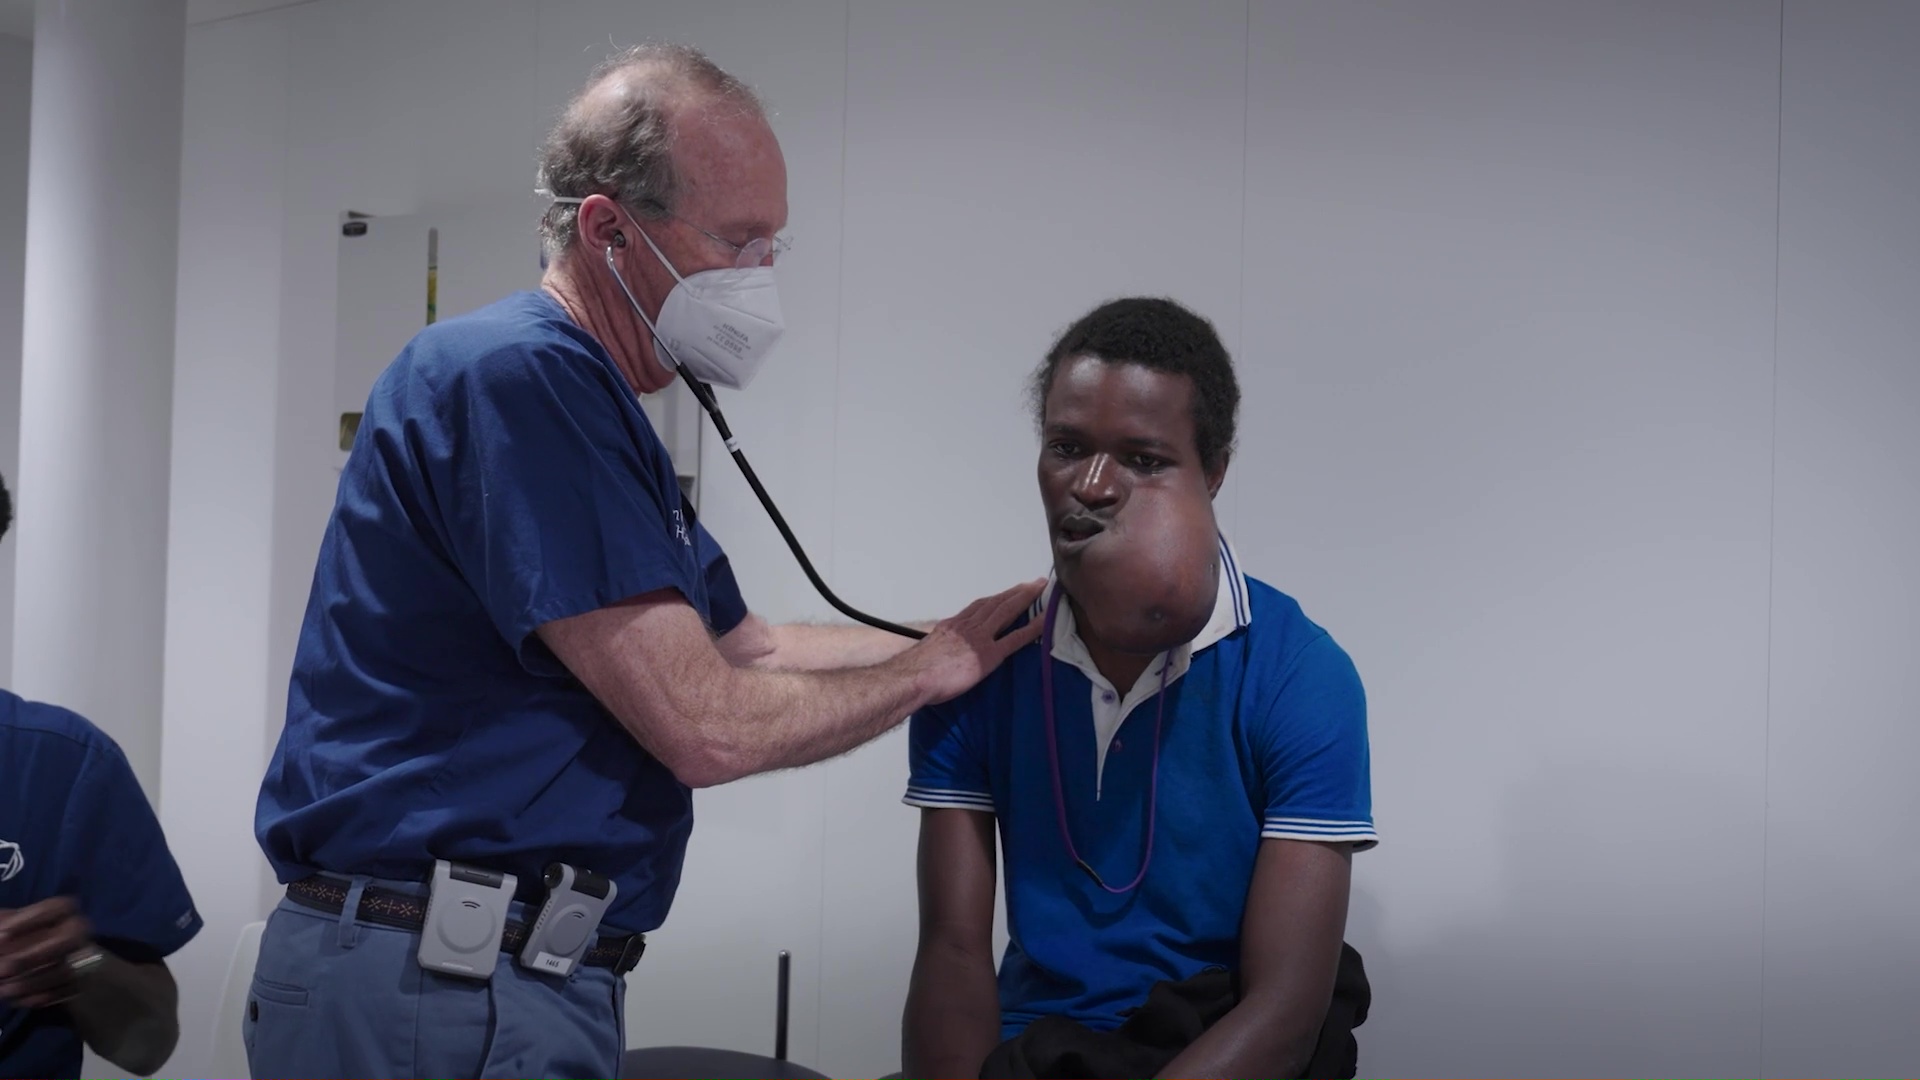 Papa's life was transformed after receiving facial surgery on board the Christian medical ship to remove the tumor in Senegal.